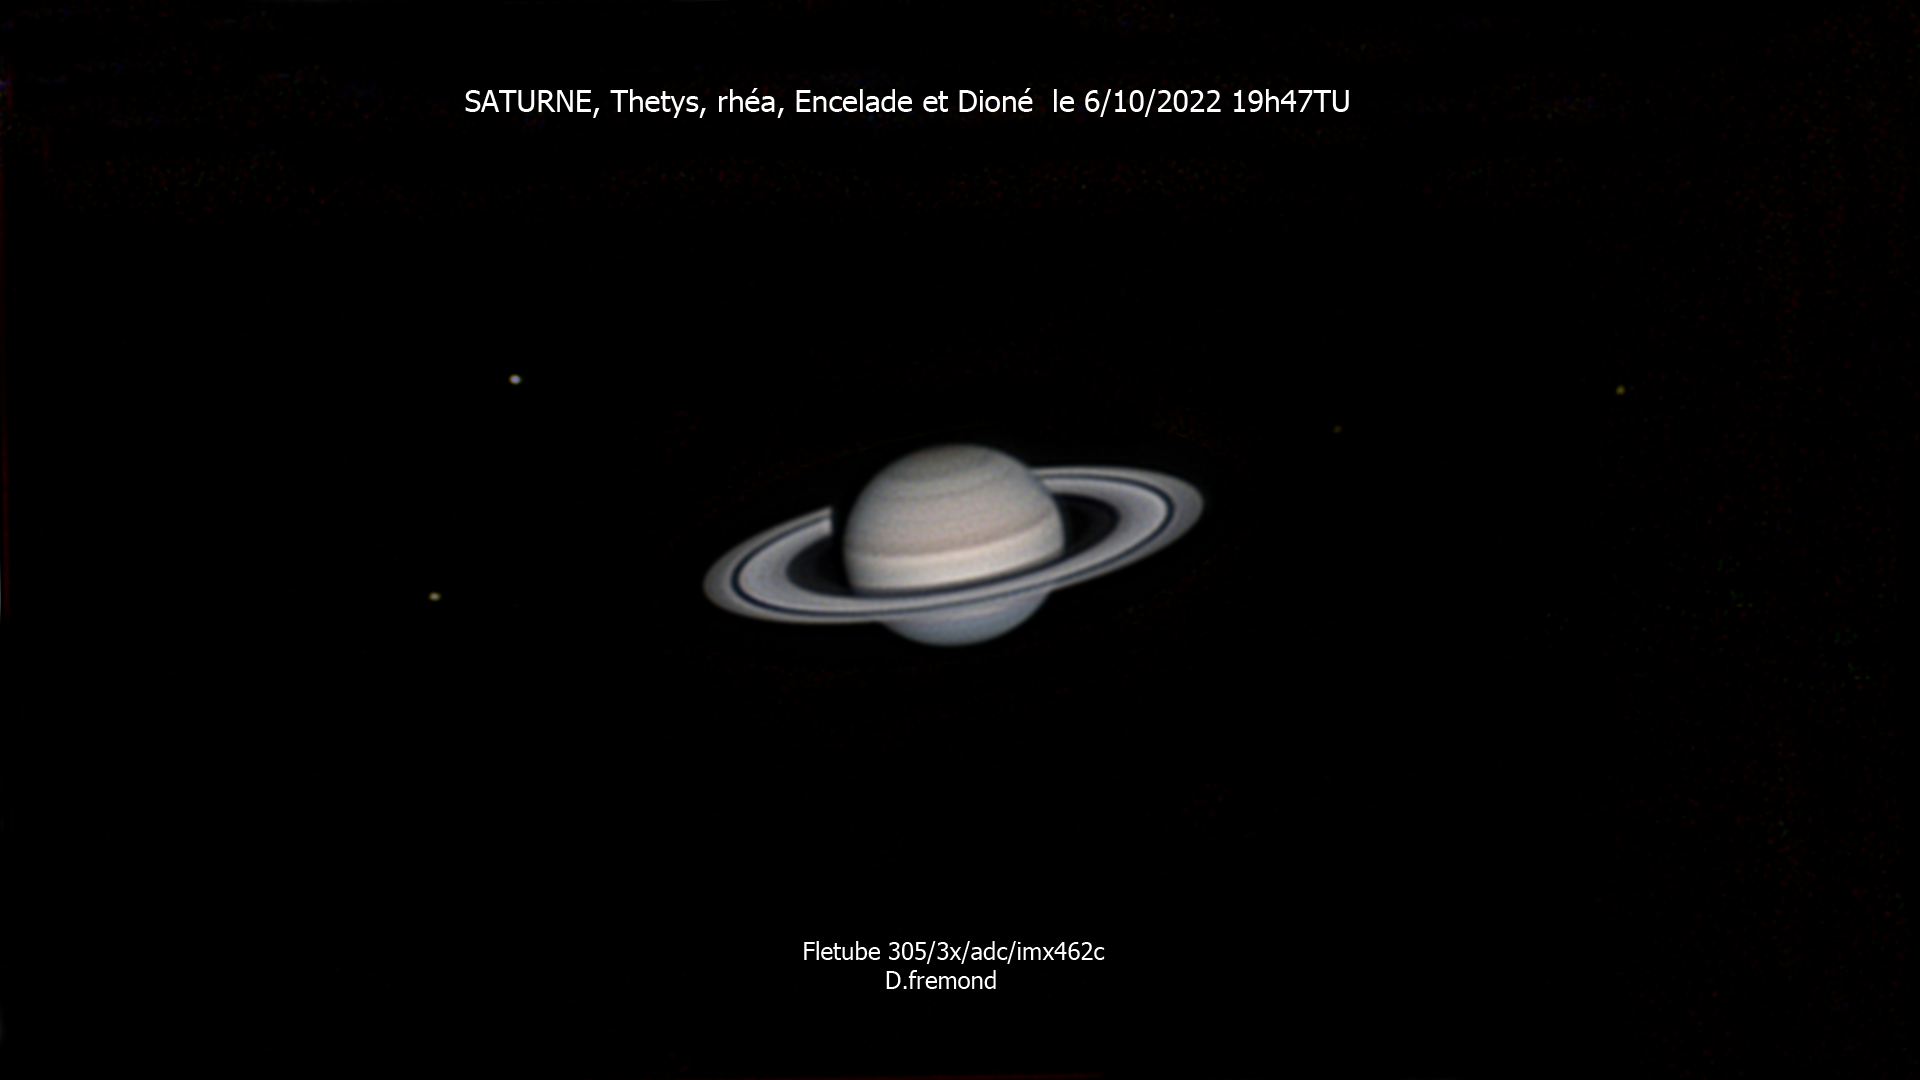 Saturne19h47.png.8f762d5888370daf1f8be35c16bb318b.png